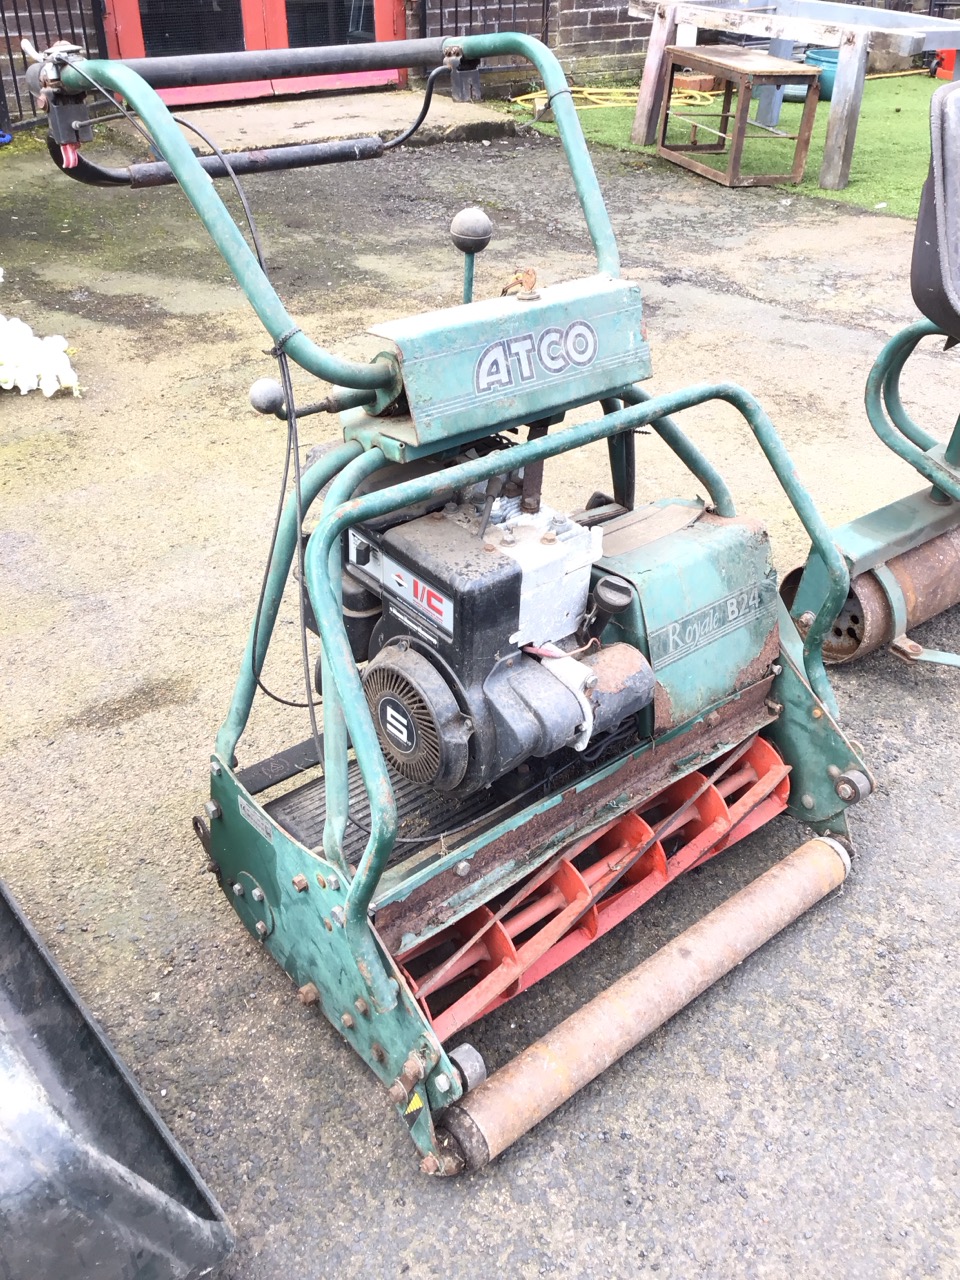 An Atco Royal B24 ride-on mower with detachable seat and roller and grass collection bucket. (3) - Image 3 of 3